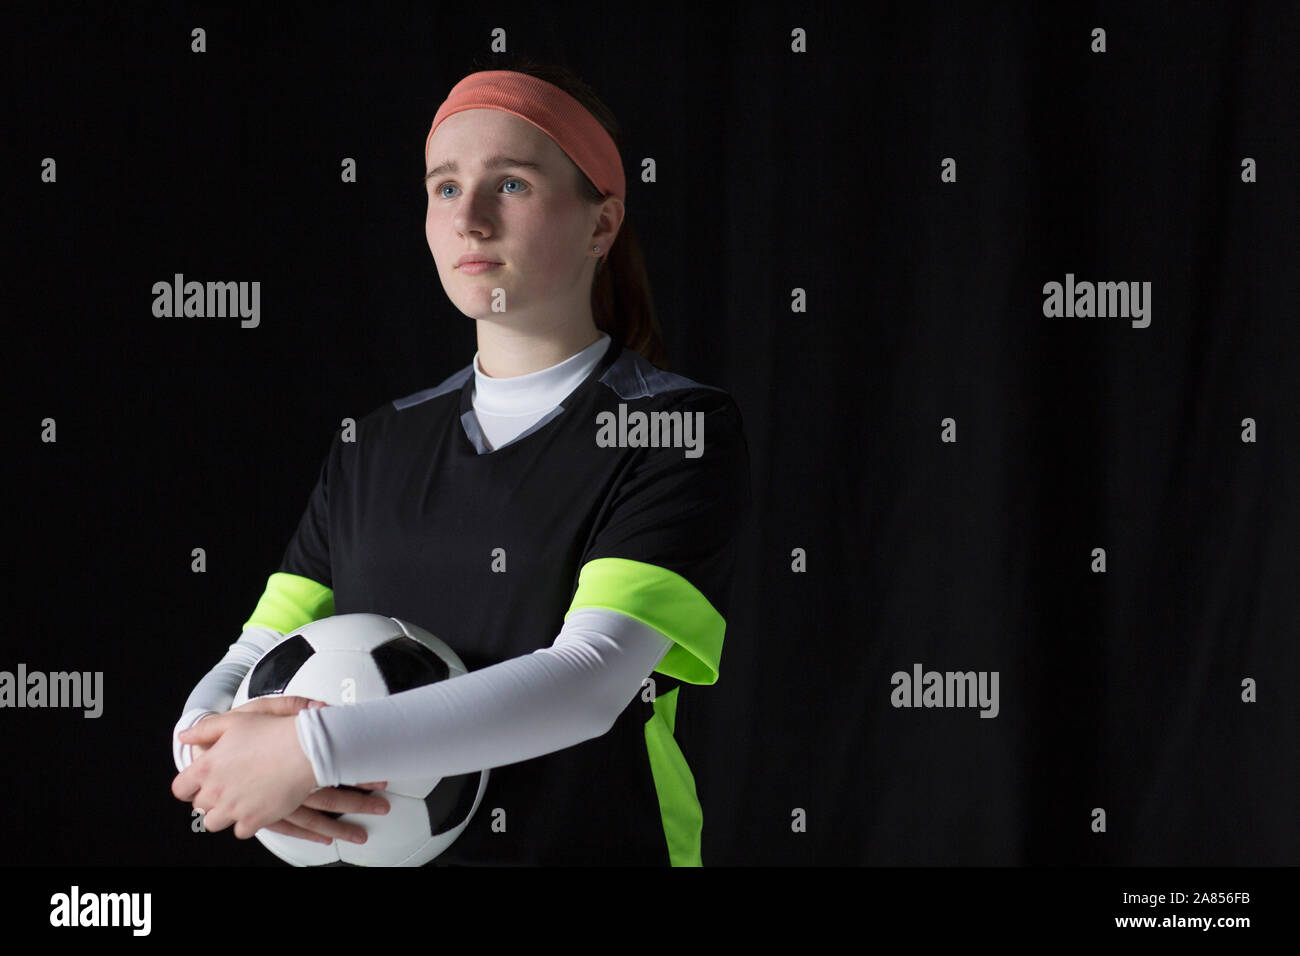 Portrait confident, ambitious teenage girl soccer player holding ball Stock Photo